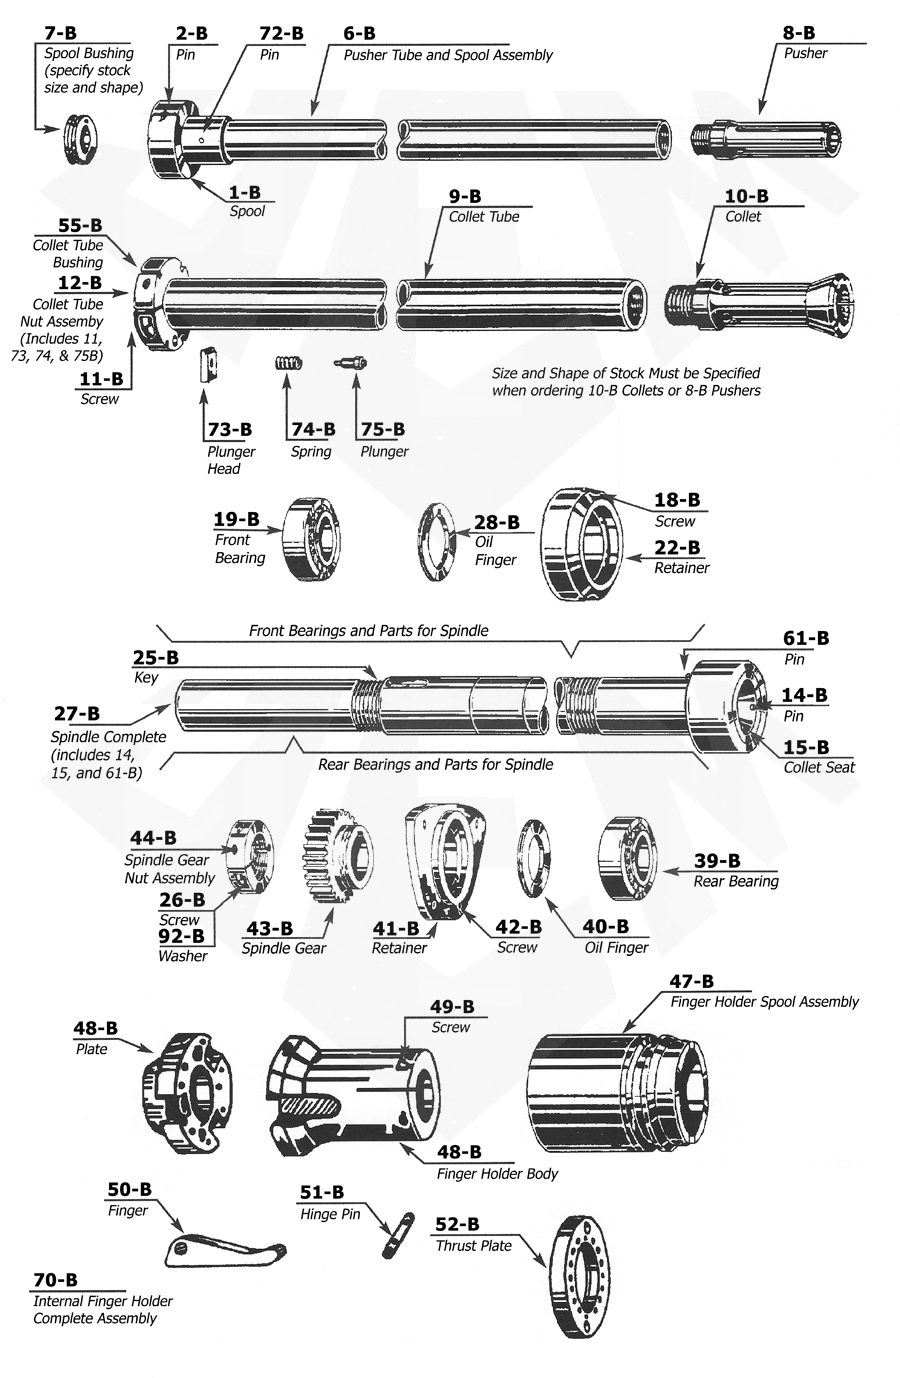 Acme Gridley 5/8 RN-6 Parts Catalog Group B